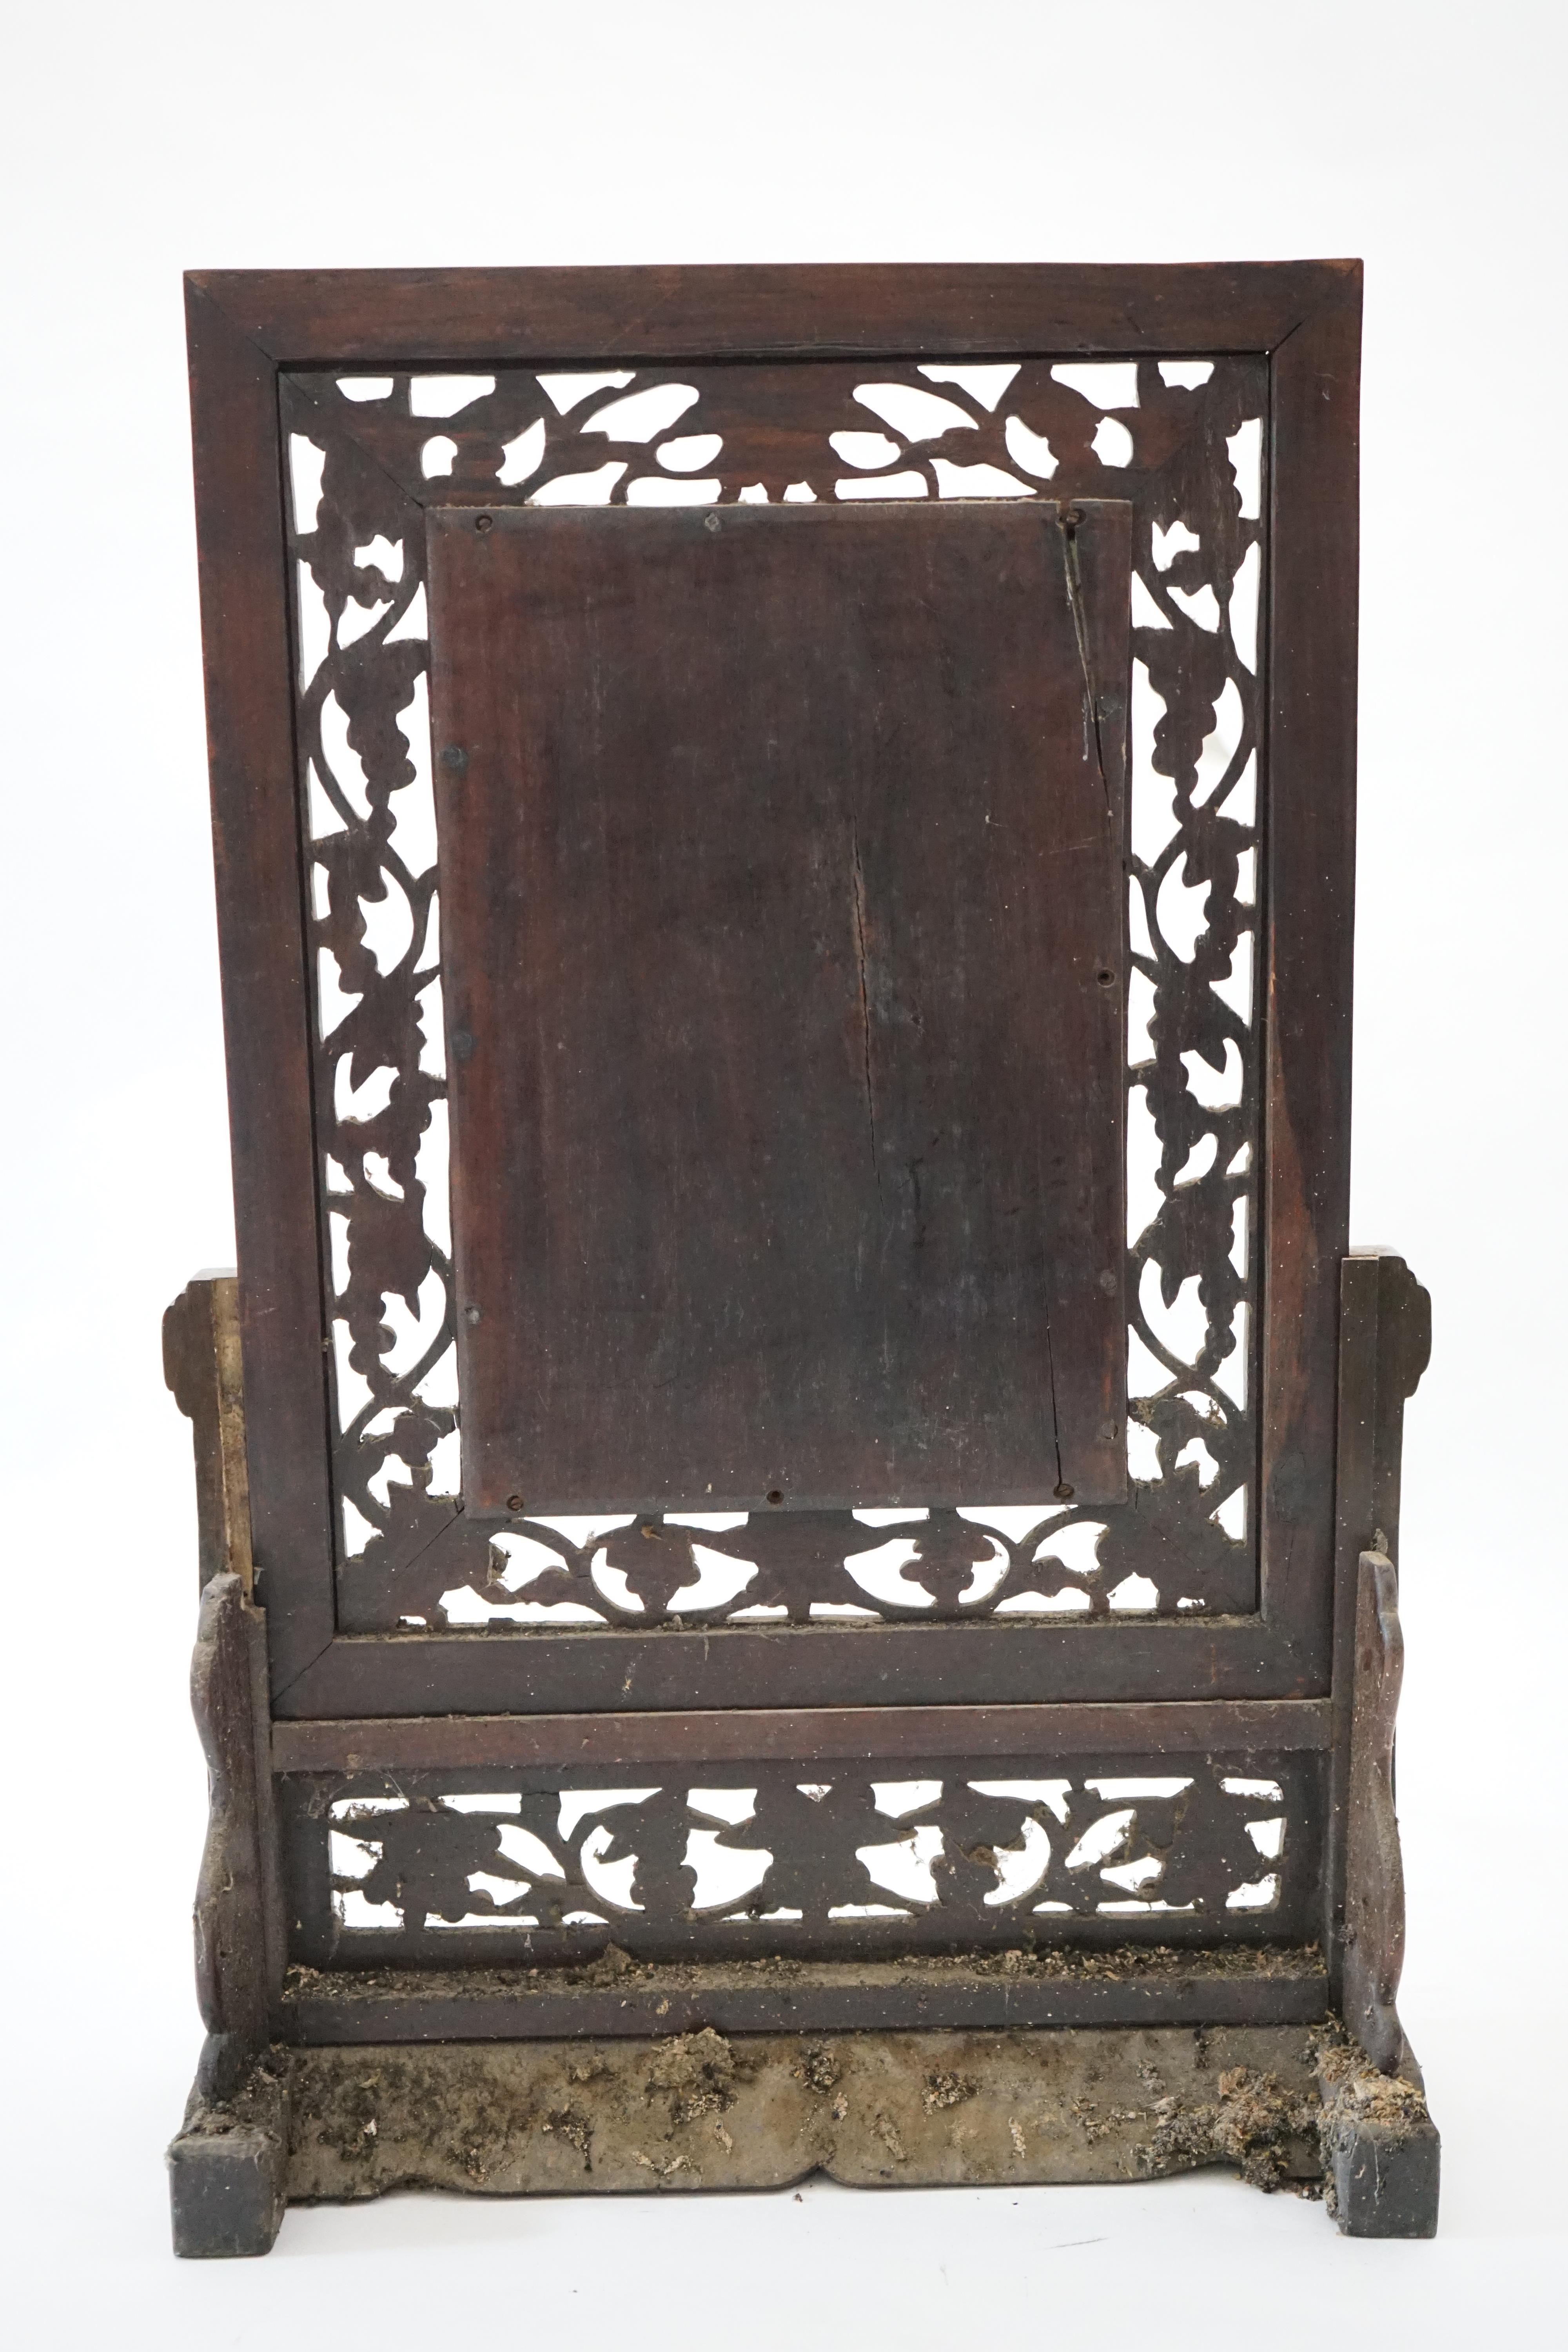 A Chinese enamelled porcelain and hardwood table screen Republic period, stand very dirty